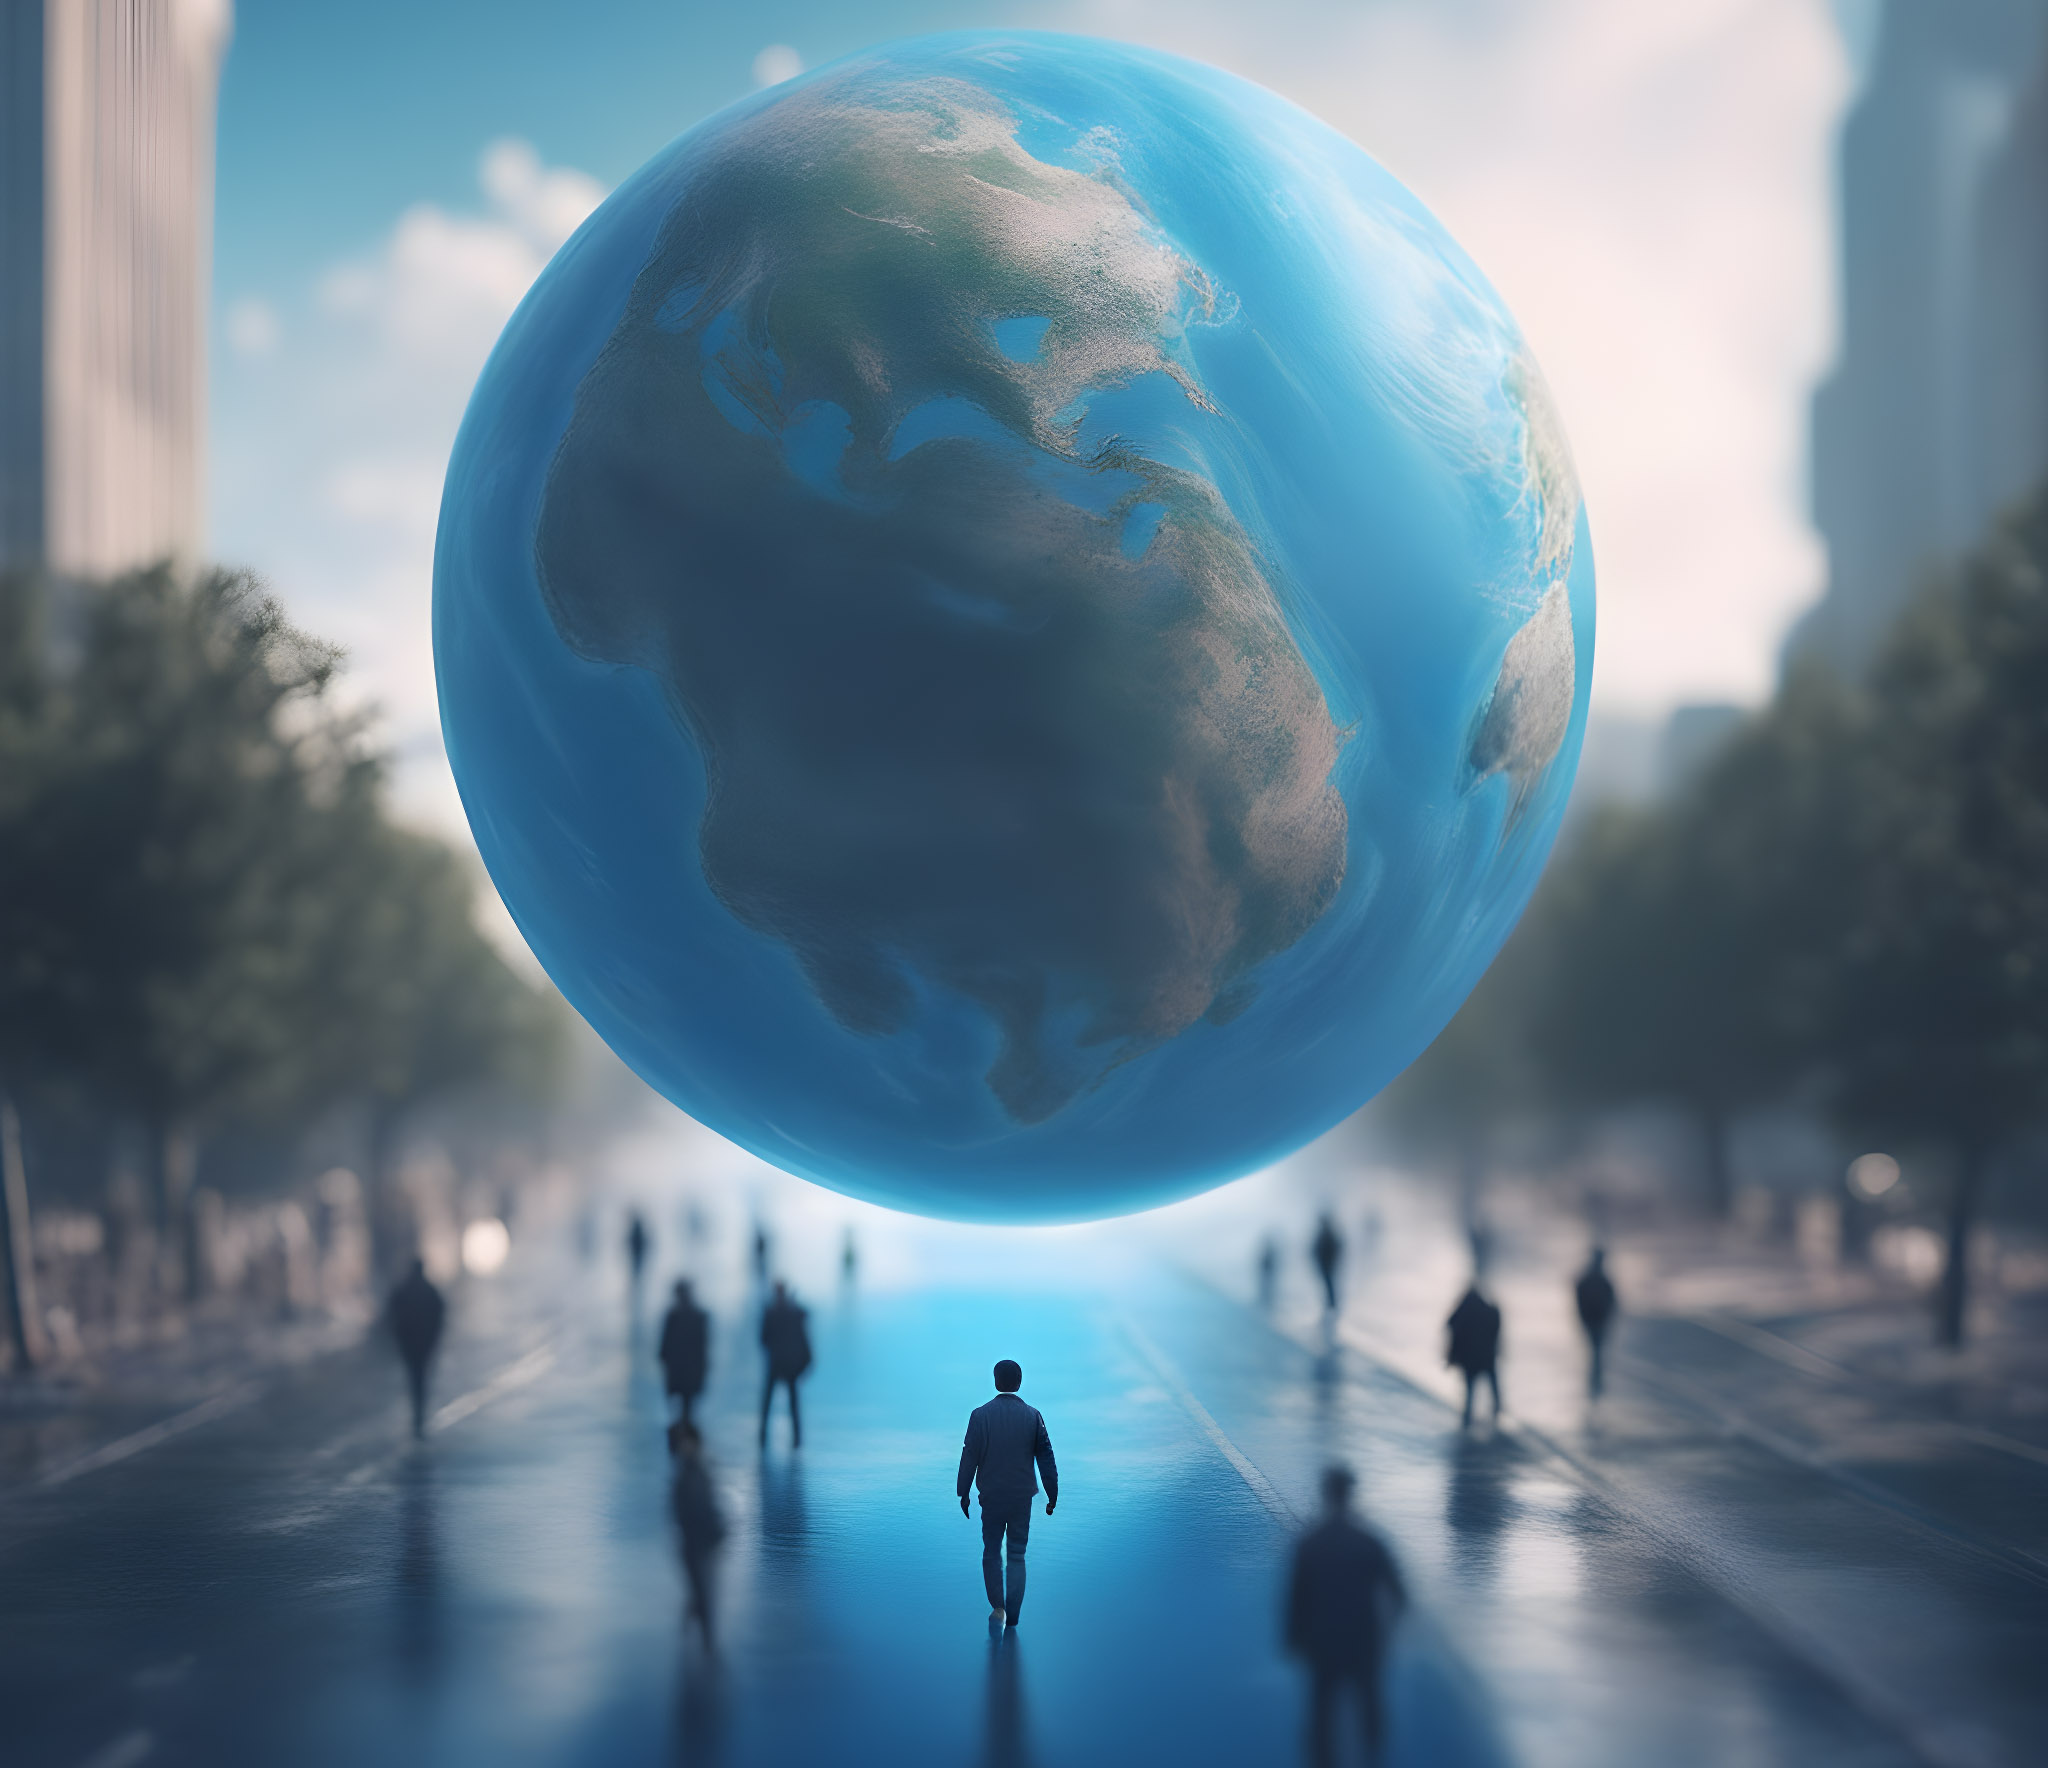 Image describing a better world with Blue Earth Project